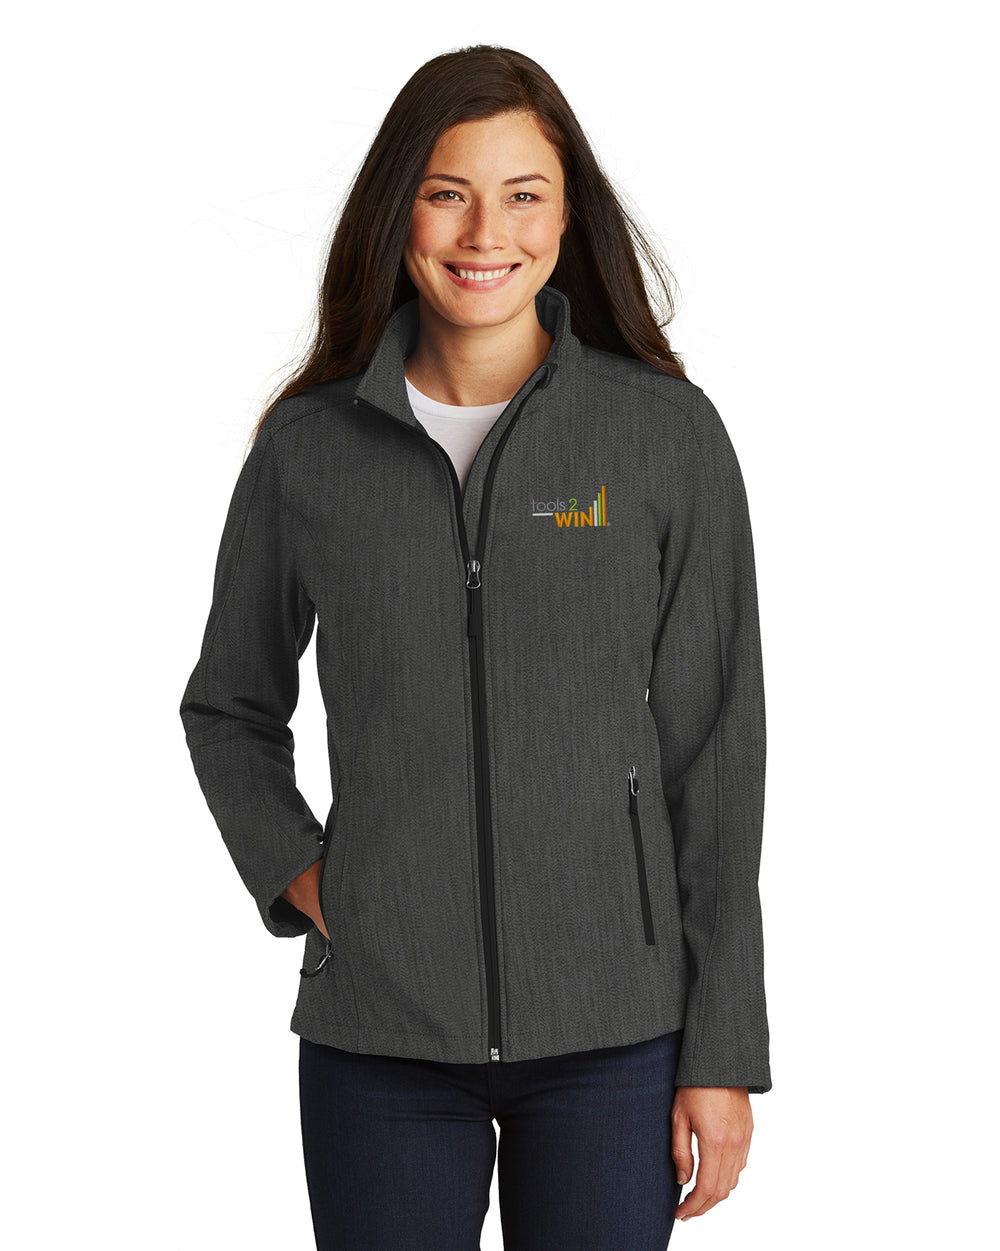 Tools2Win - Port Authority Ladies Core Soft Shell Jacket - L317